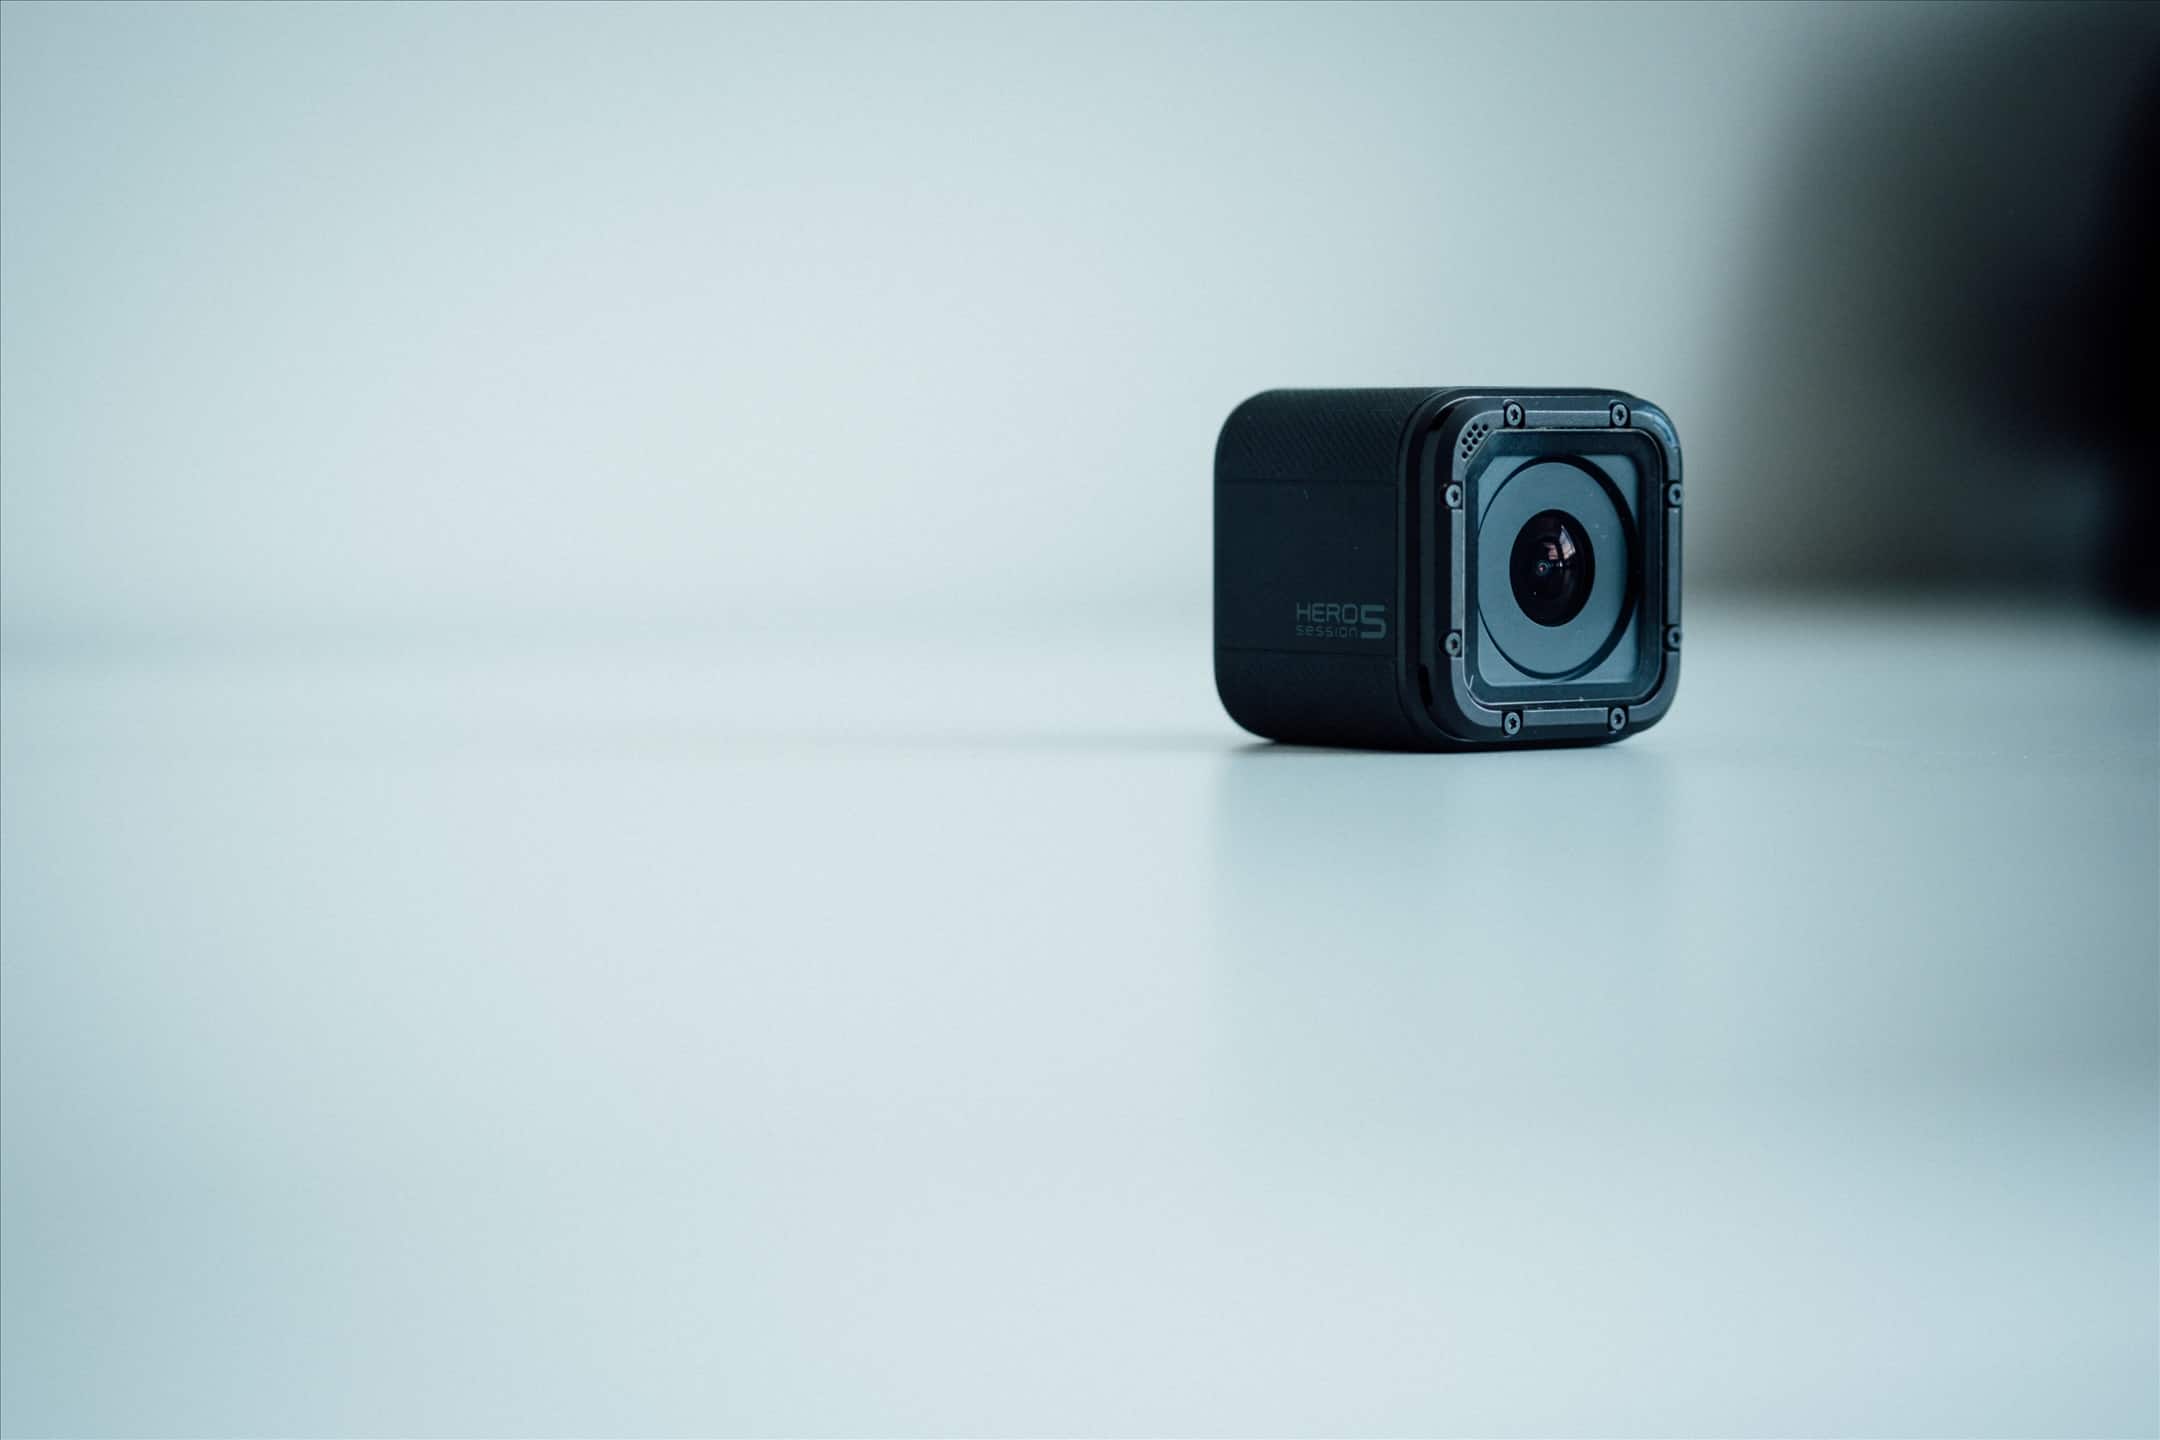 chris akrigg recommends How To Hide A Gopro In A Room